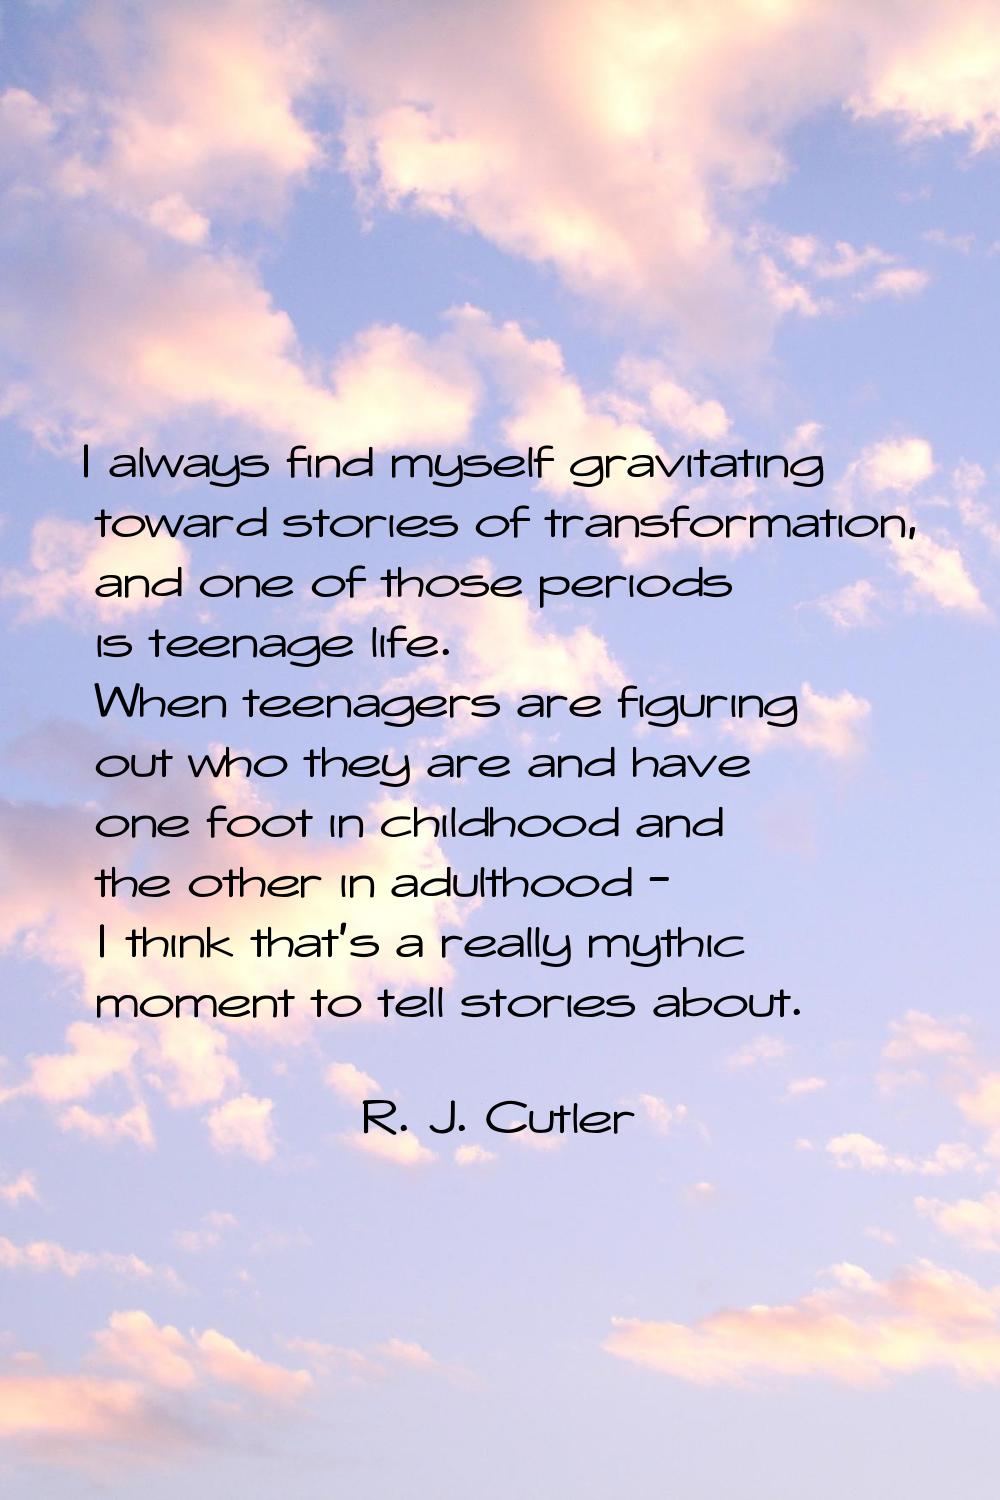 I always find myself gravitating toward stories of transformation, and one of those periods is teen